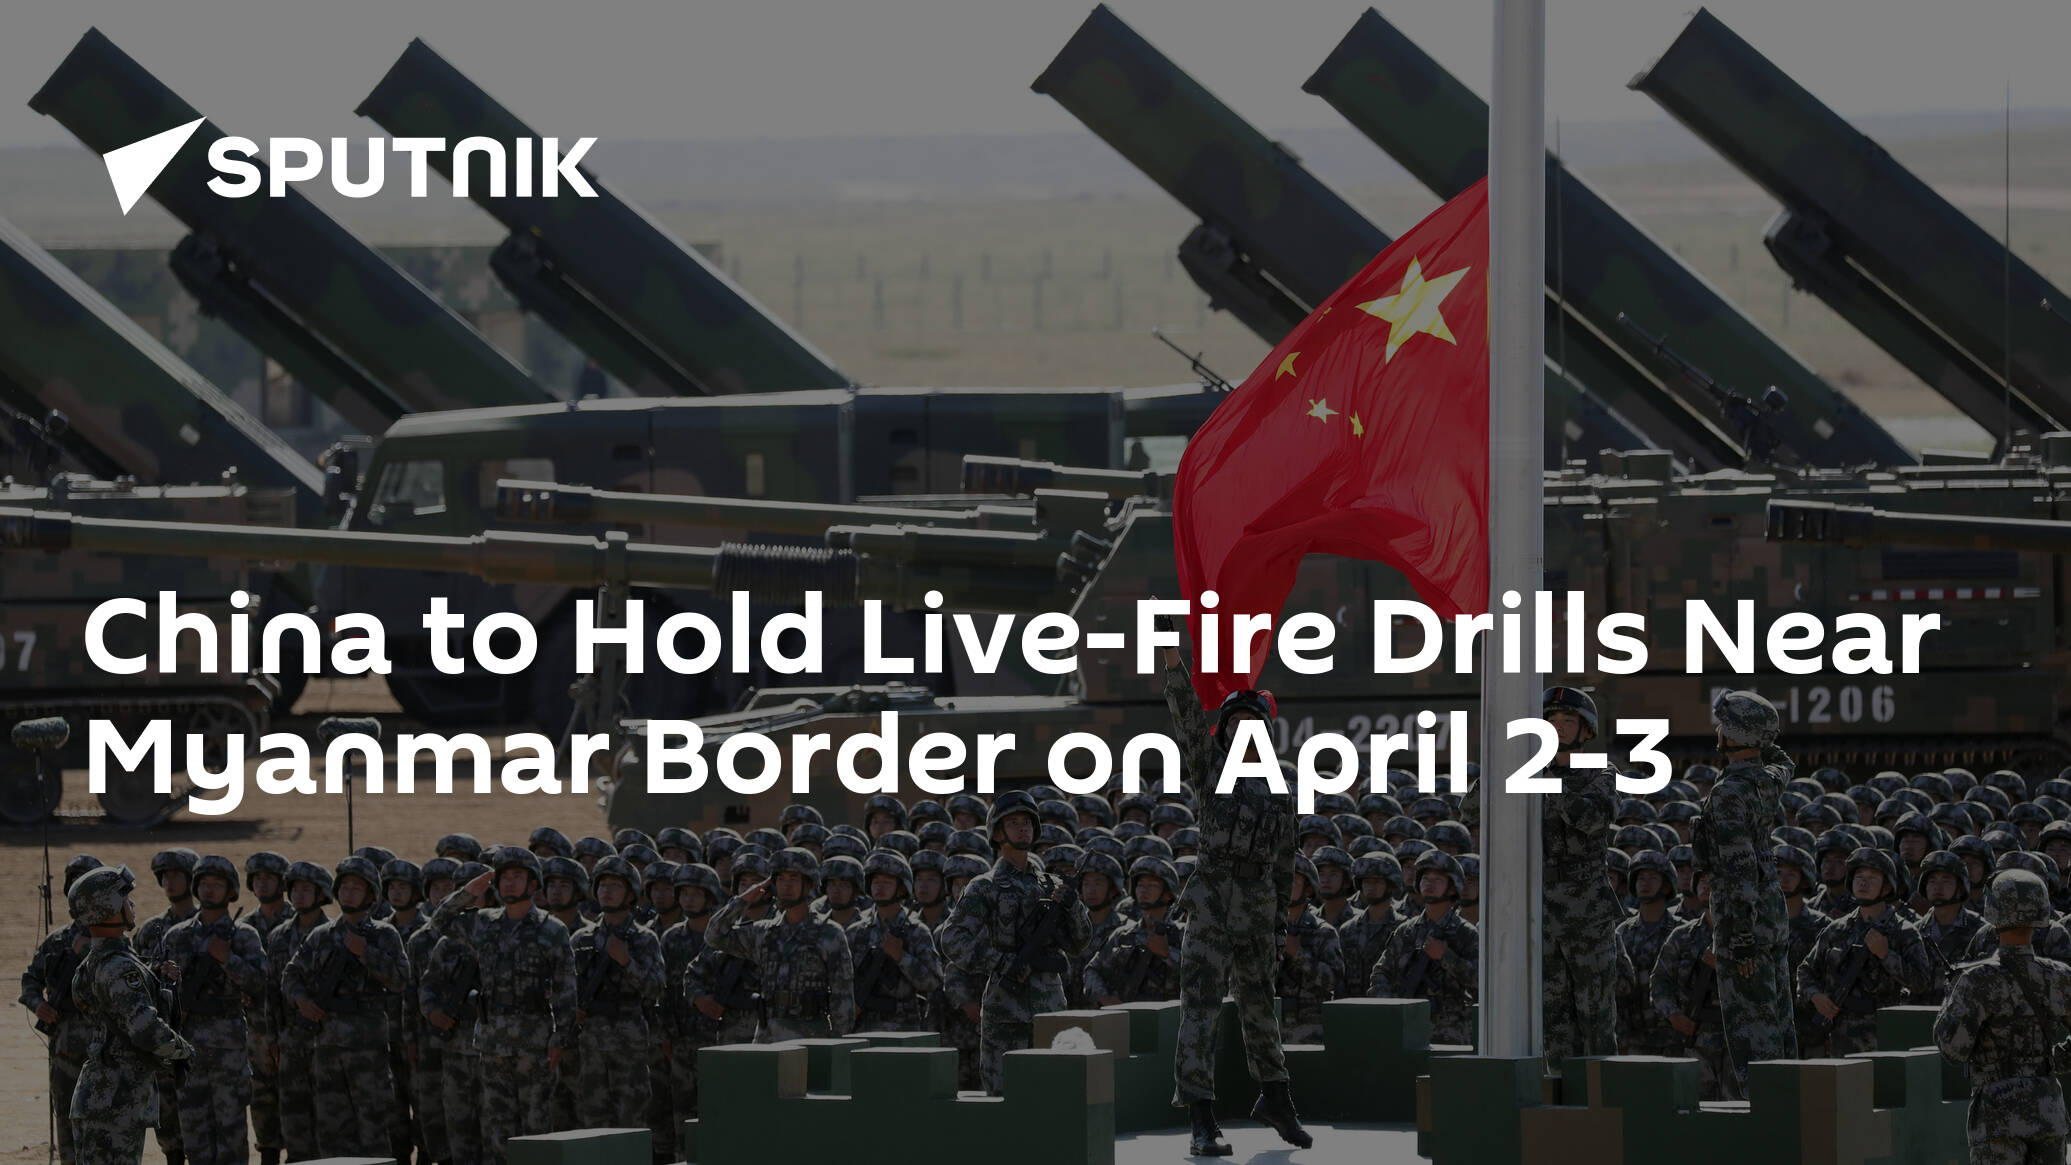 China to Hold Live-Fire Drills Near Myanmar Border on April 2-3